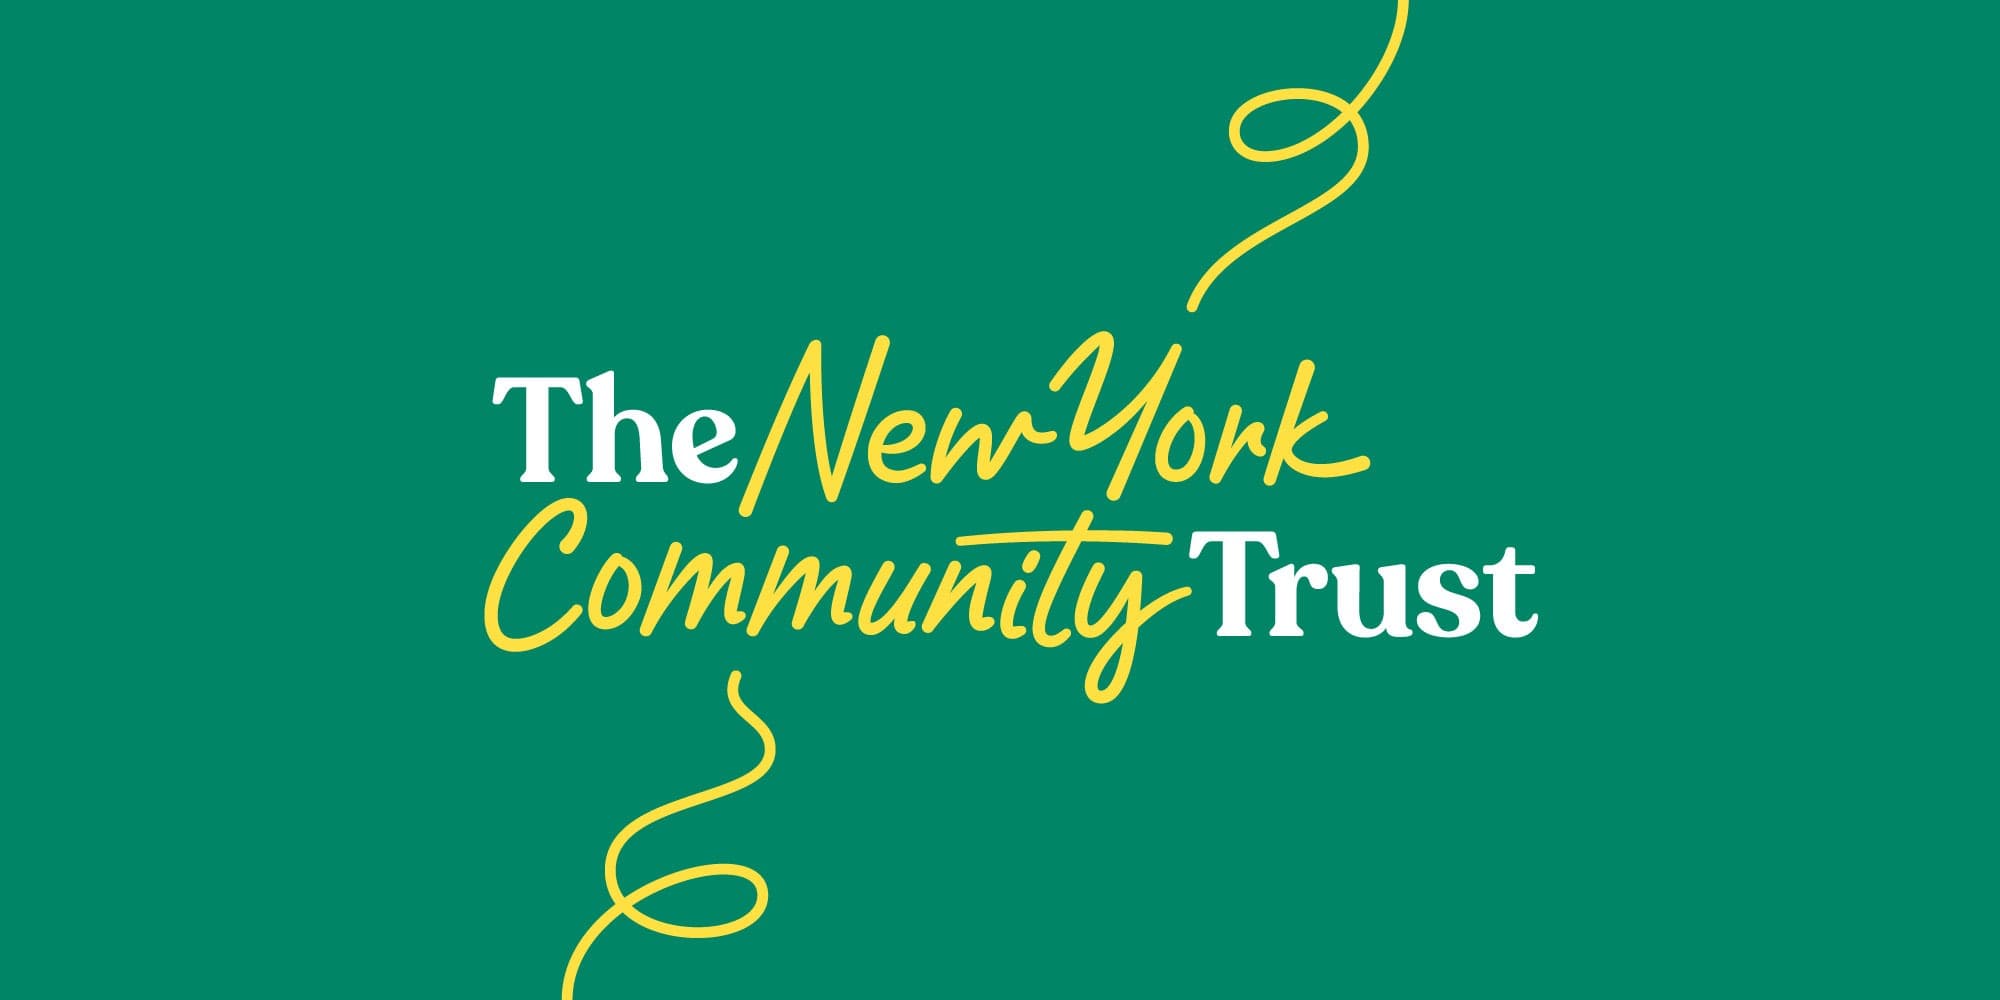 A green background with the words "The New York Community Trust" written in white and yellow cursive. Yellow stripes curl around the text, adding a decorative element.